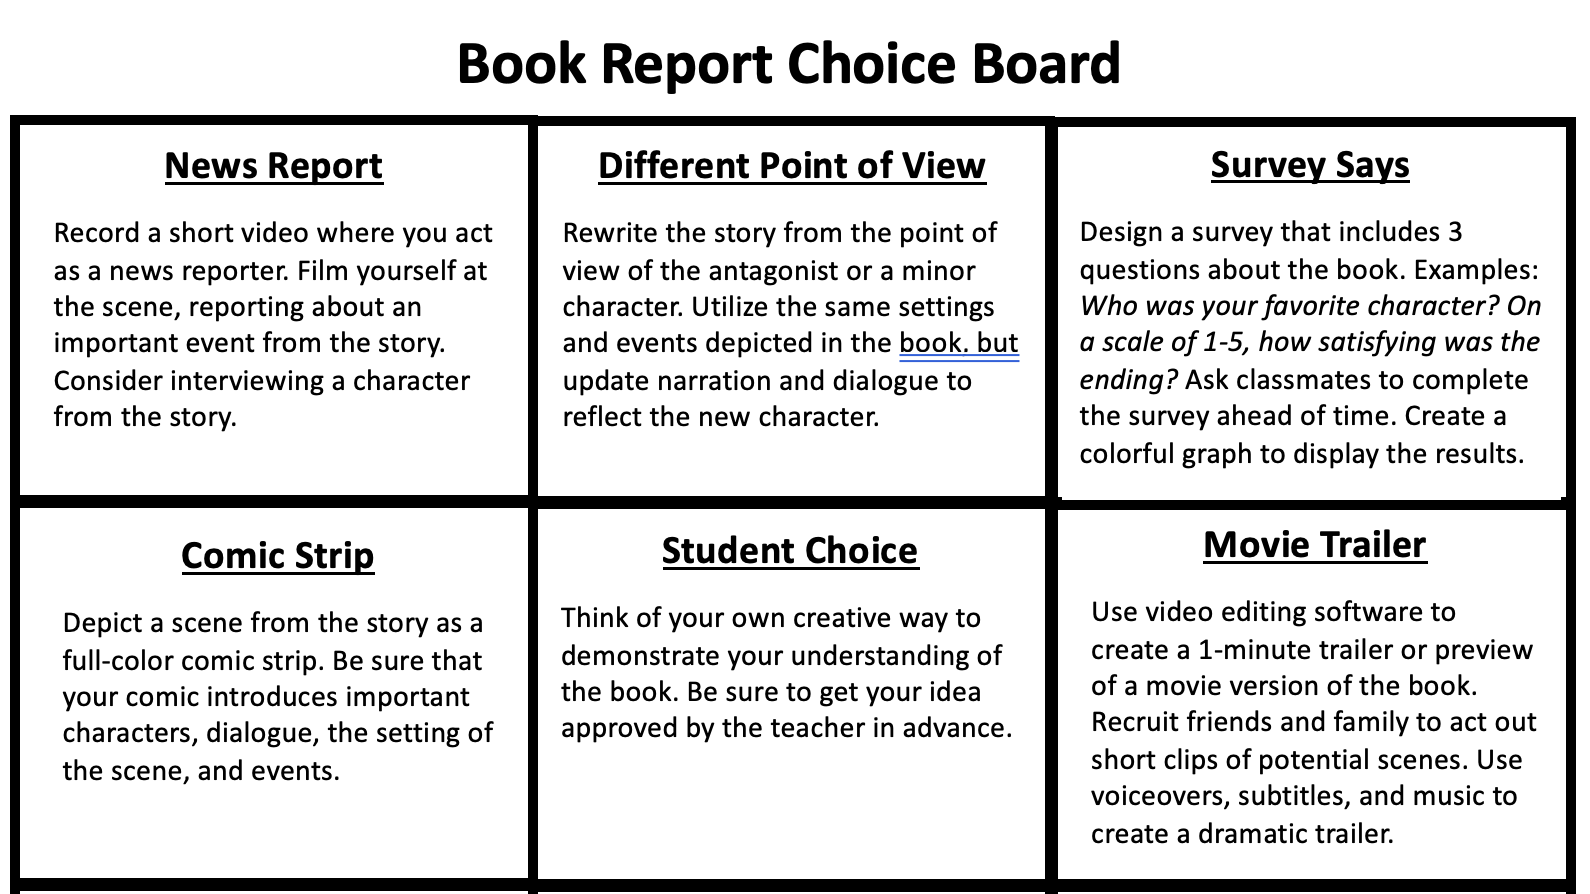 This 6-option table provides an example for choice board book reports.